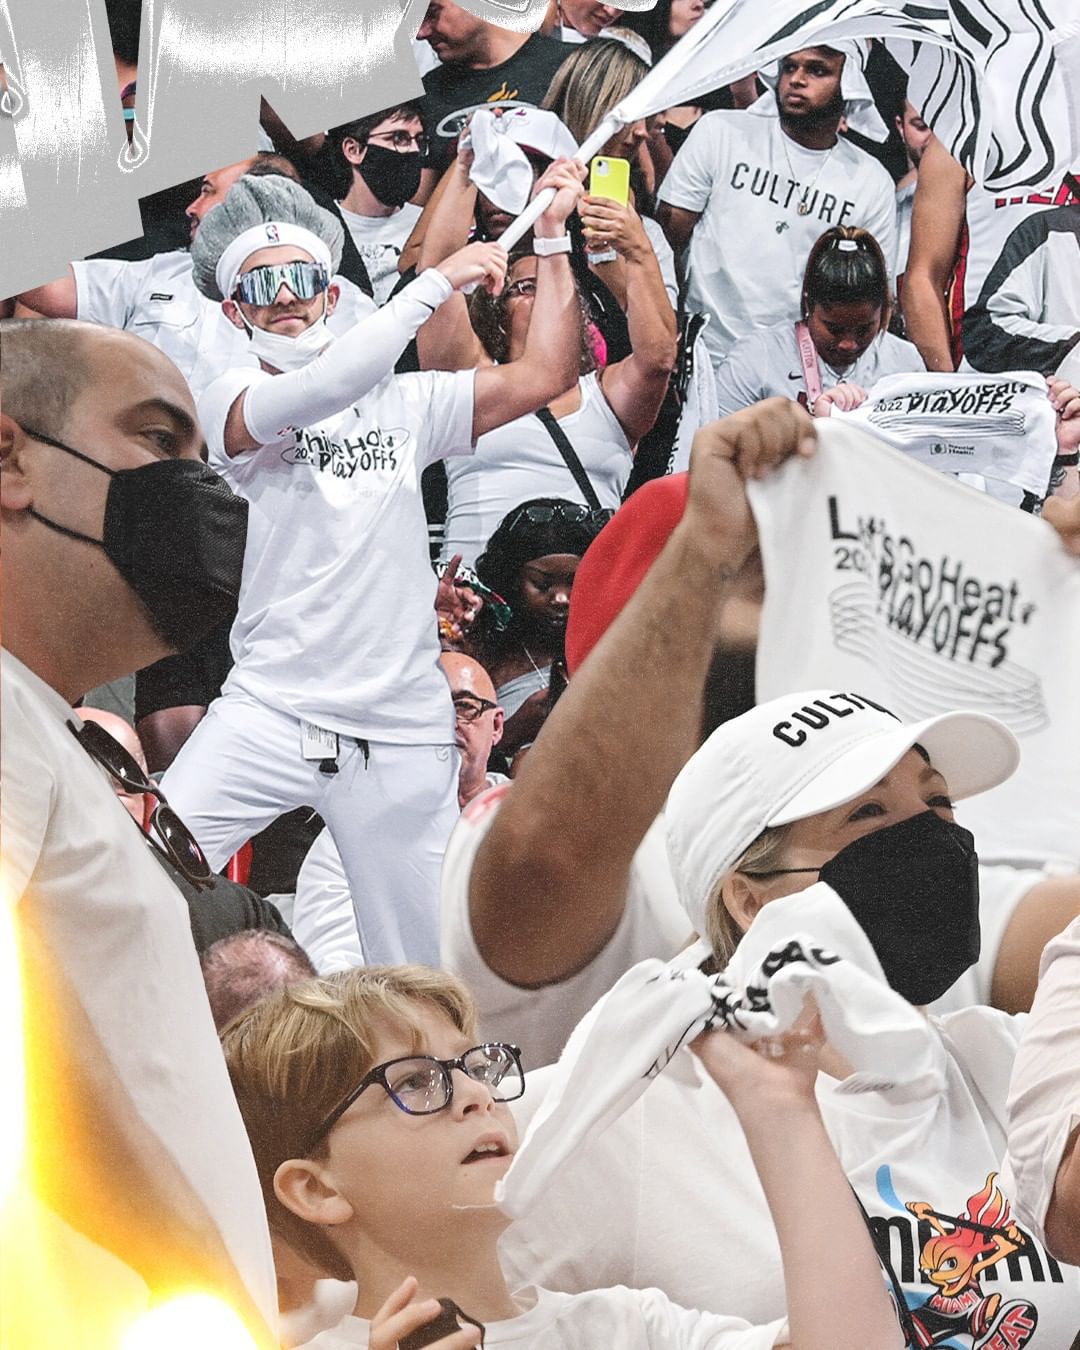 #WhiteHot is back in the 305 keep turning up the energy, #HEATNation!...